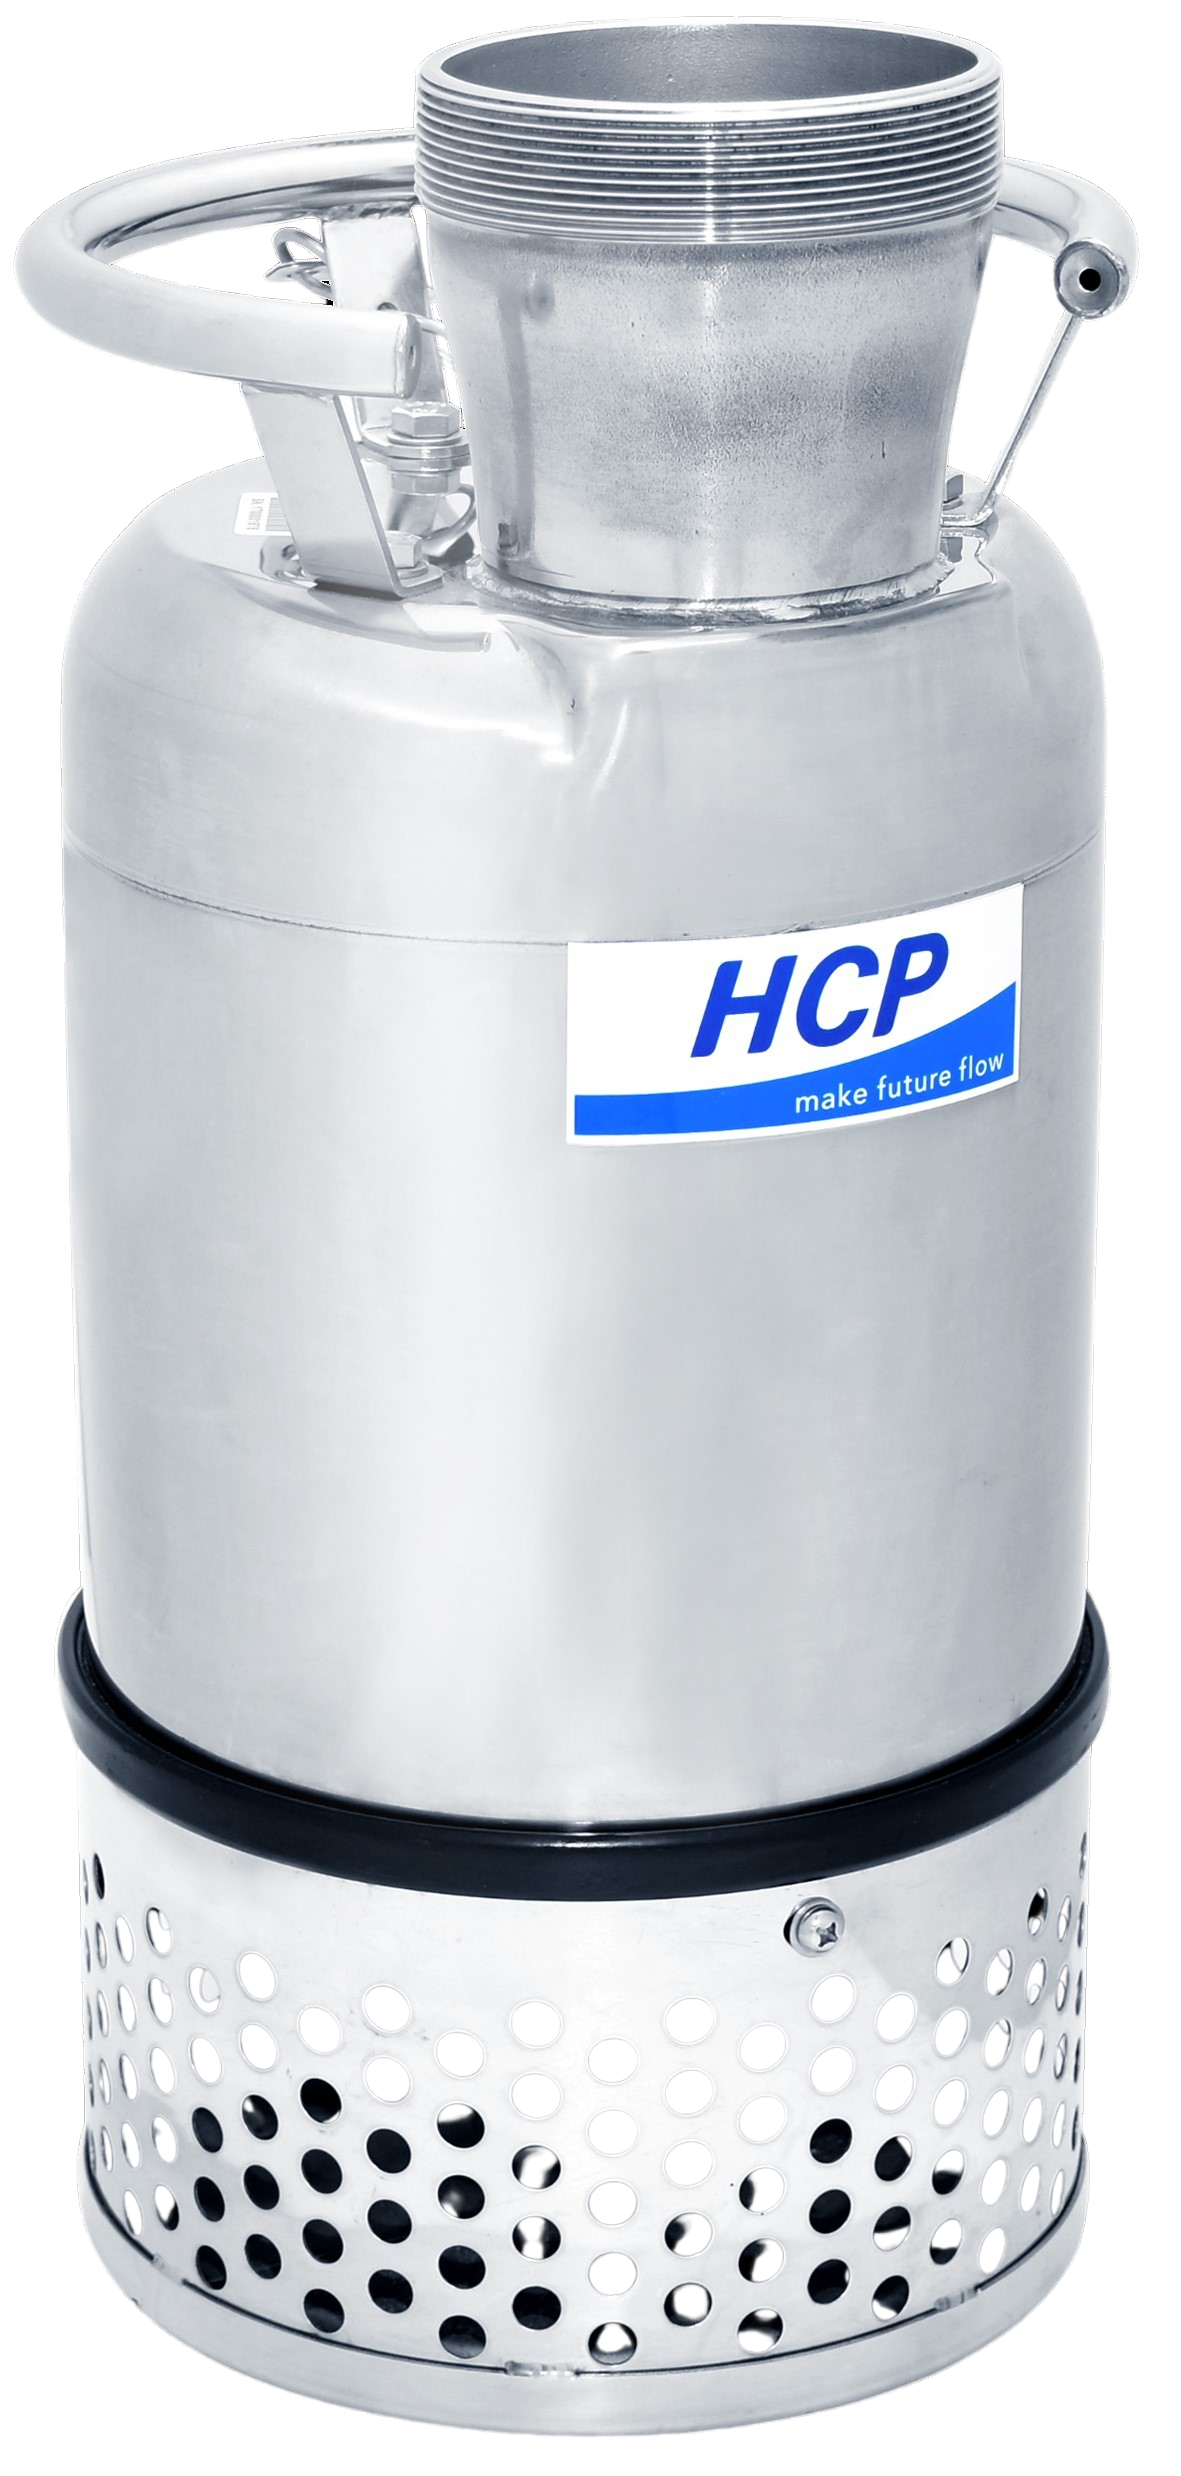 HCP Submersible XL Volume Dewatering Pump Model L-41A-6117EP - 4" Discharge | 1 HP | 120V | 255 GPM